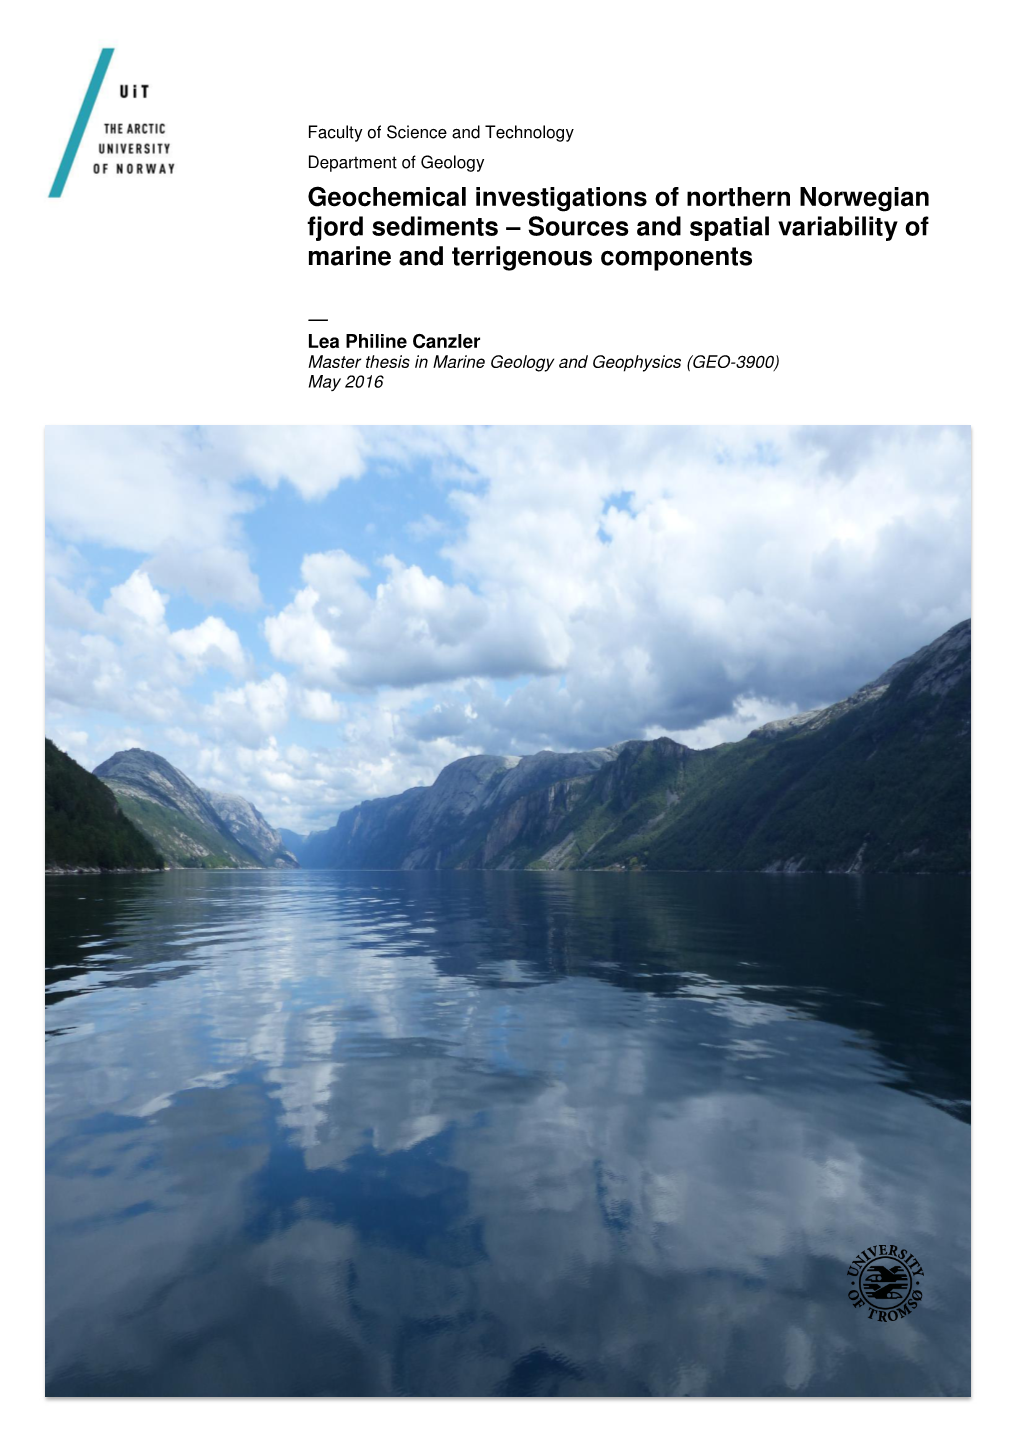 Geochemical Investigations of Northern Norwegian Fjord Sediments – Sources and Spatial Variability of Marine and Terrigenous Components